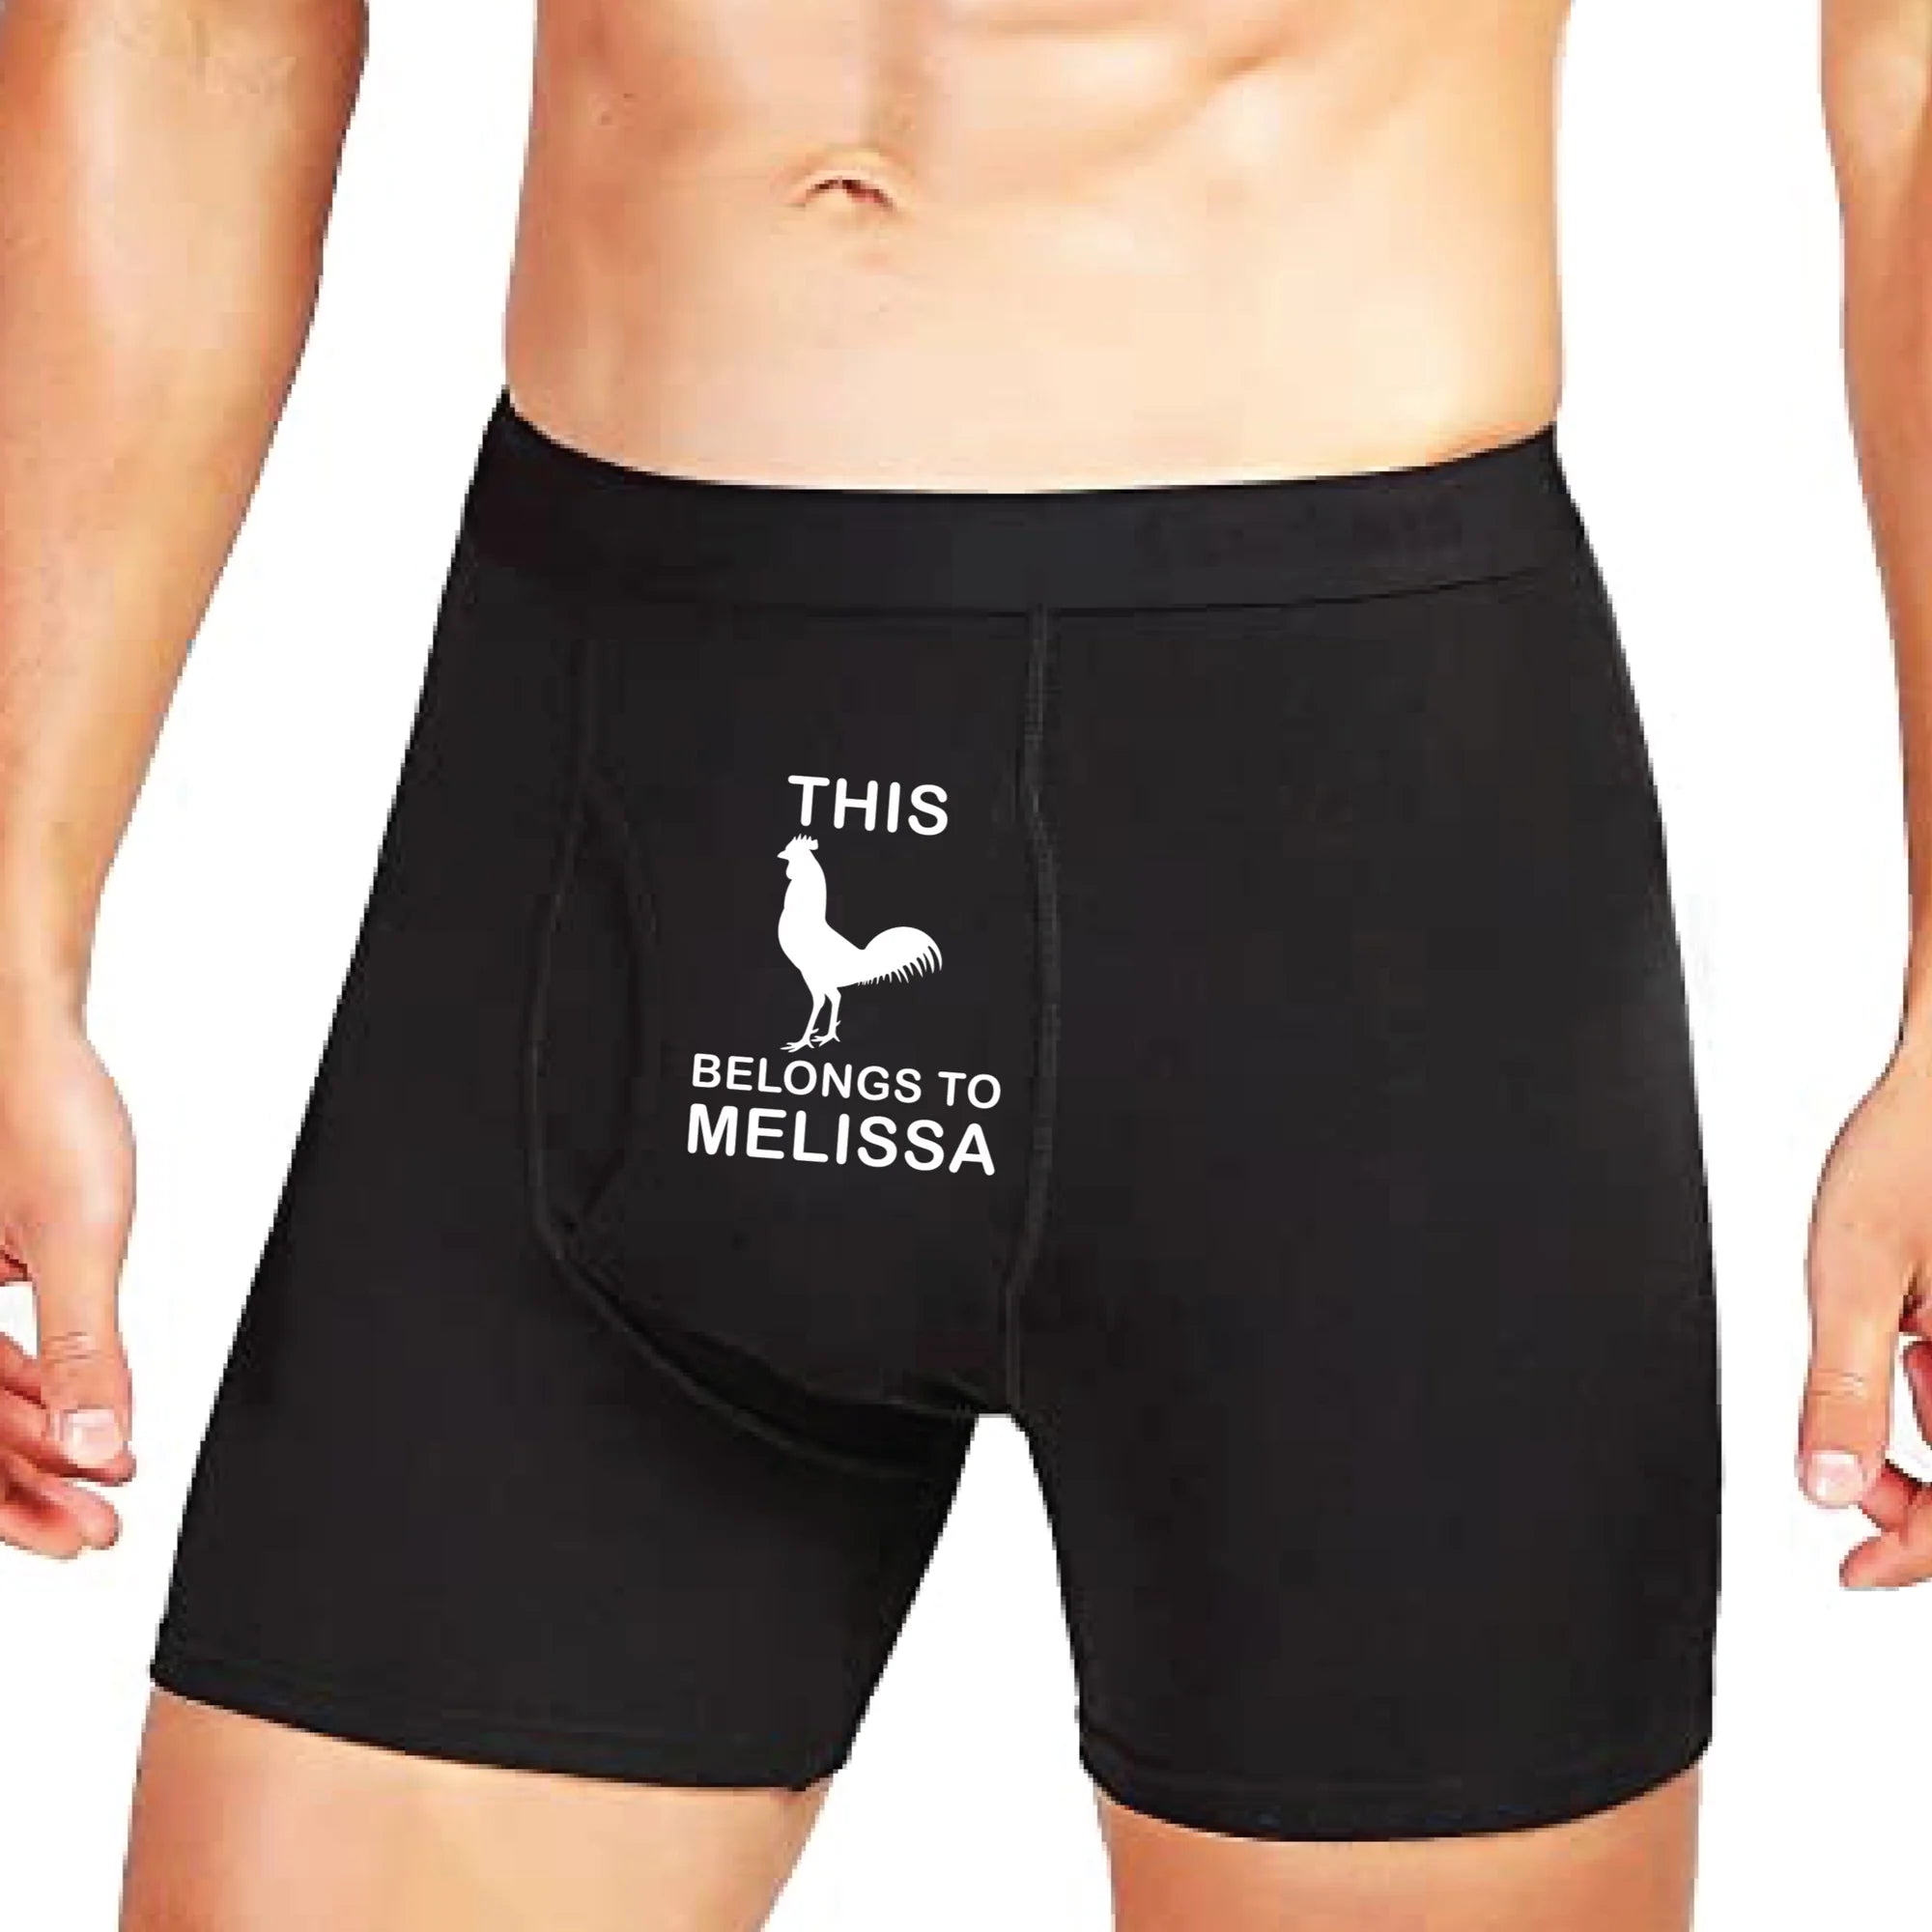 27 Sexy Boxer Briefs for Men Personalized Style Statements pic picture image